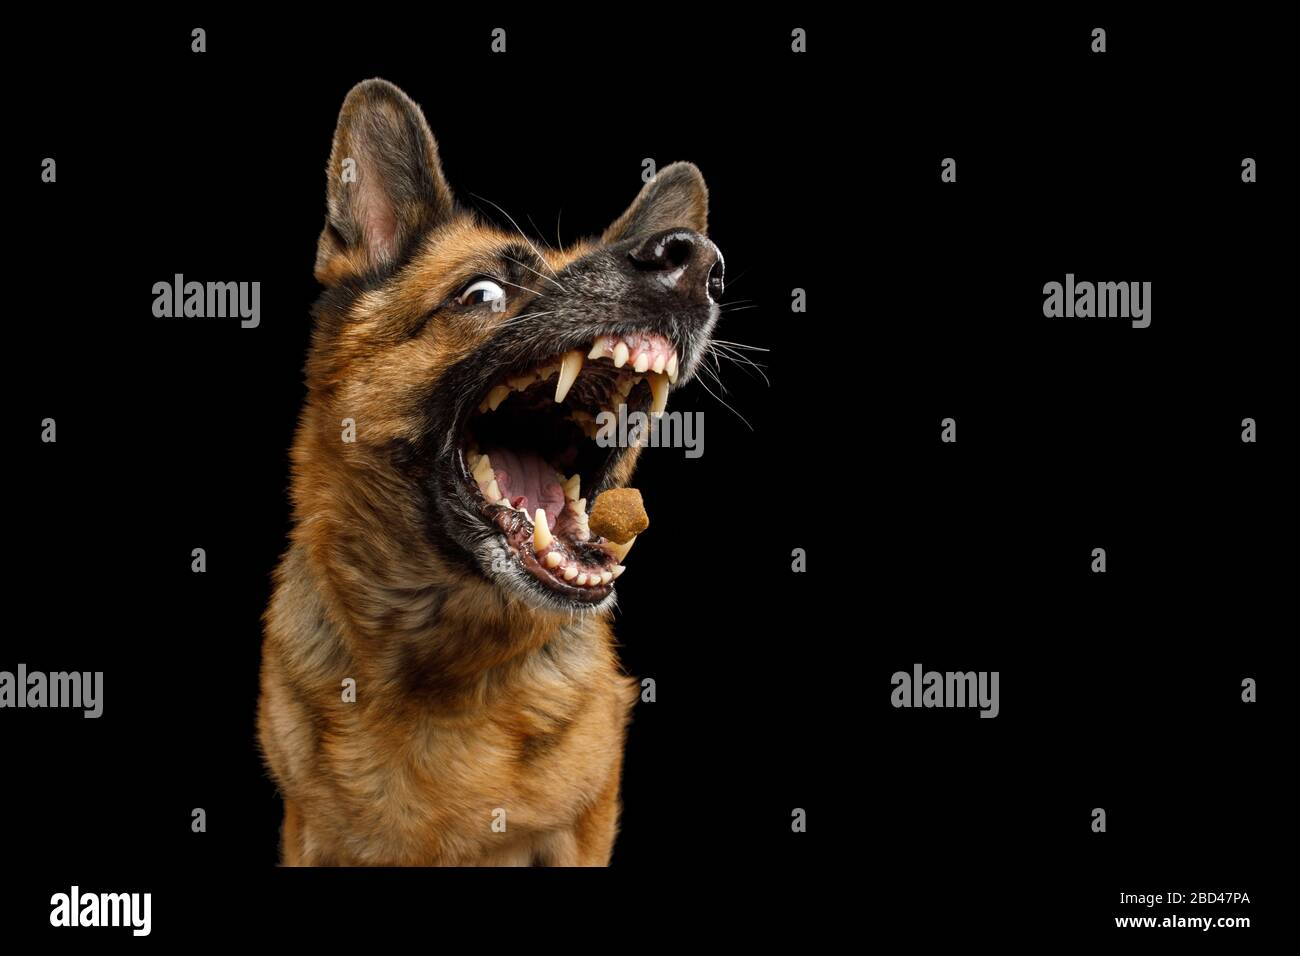 Closeup Portrait Of Funny German Shepherd Dog With Opened Mouth